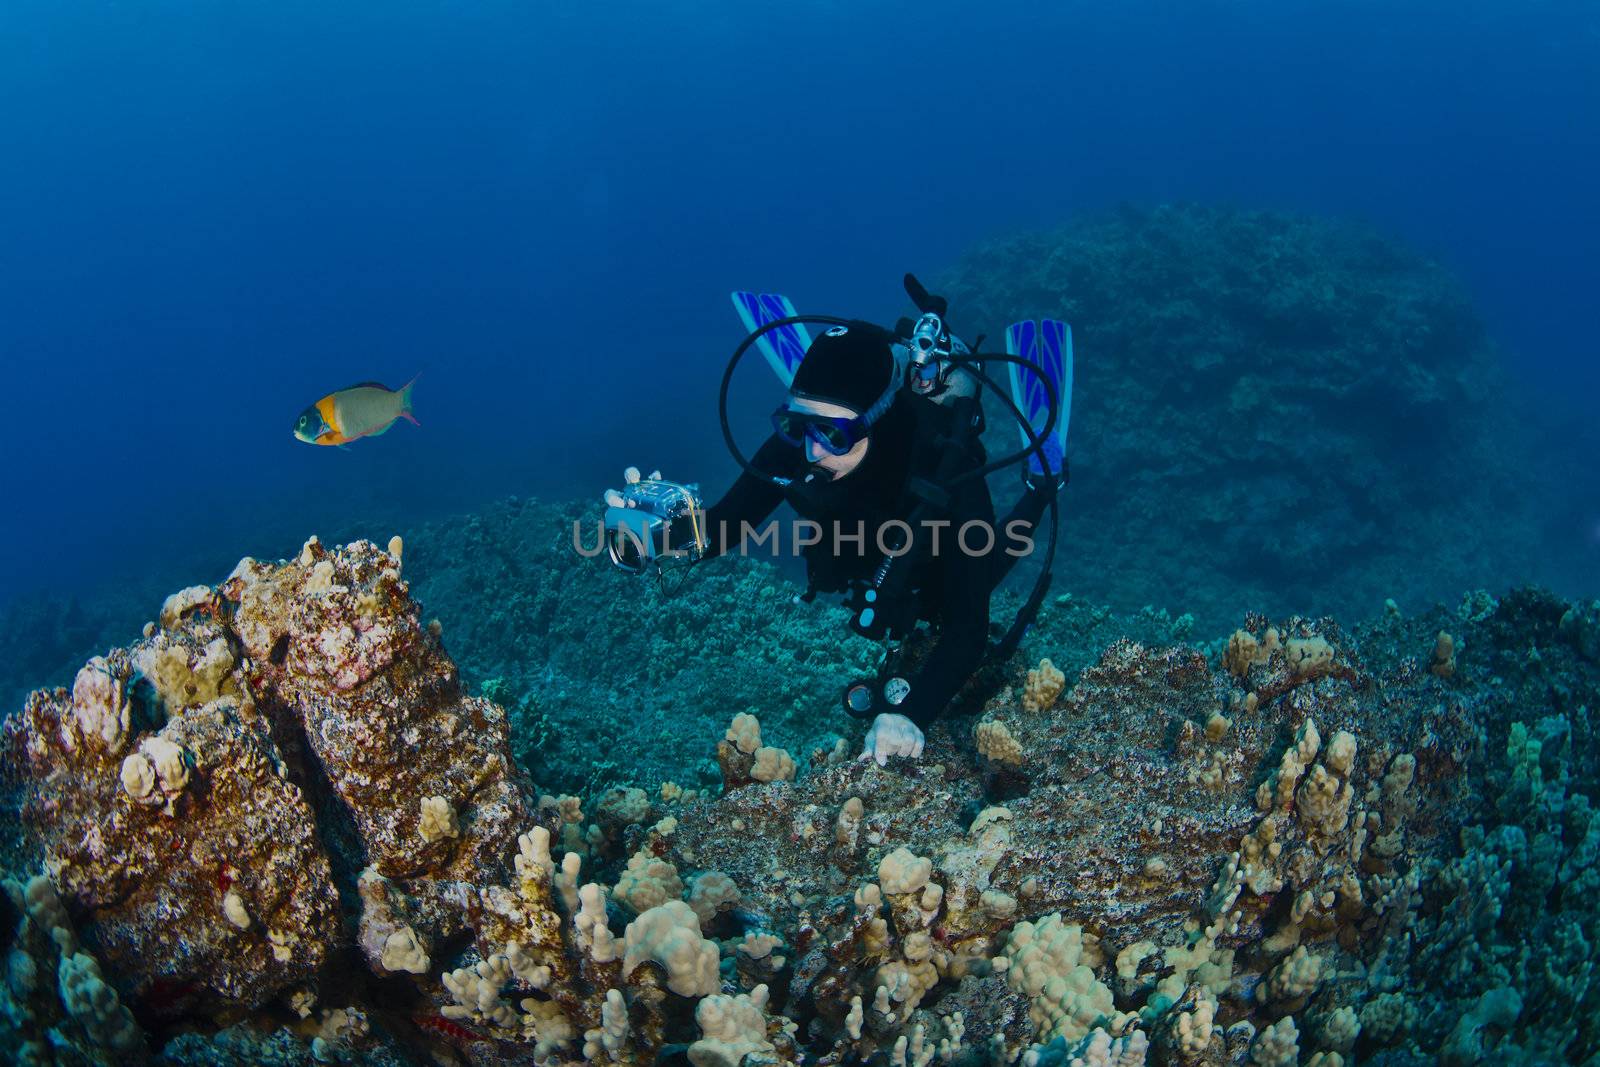 Scuba Diver photographing a Reef in Hawaii